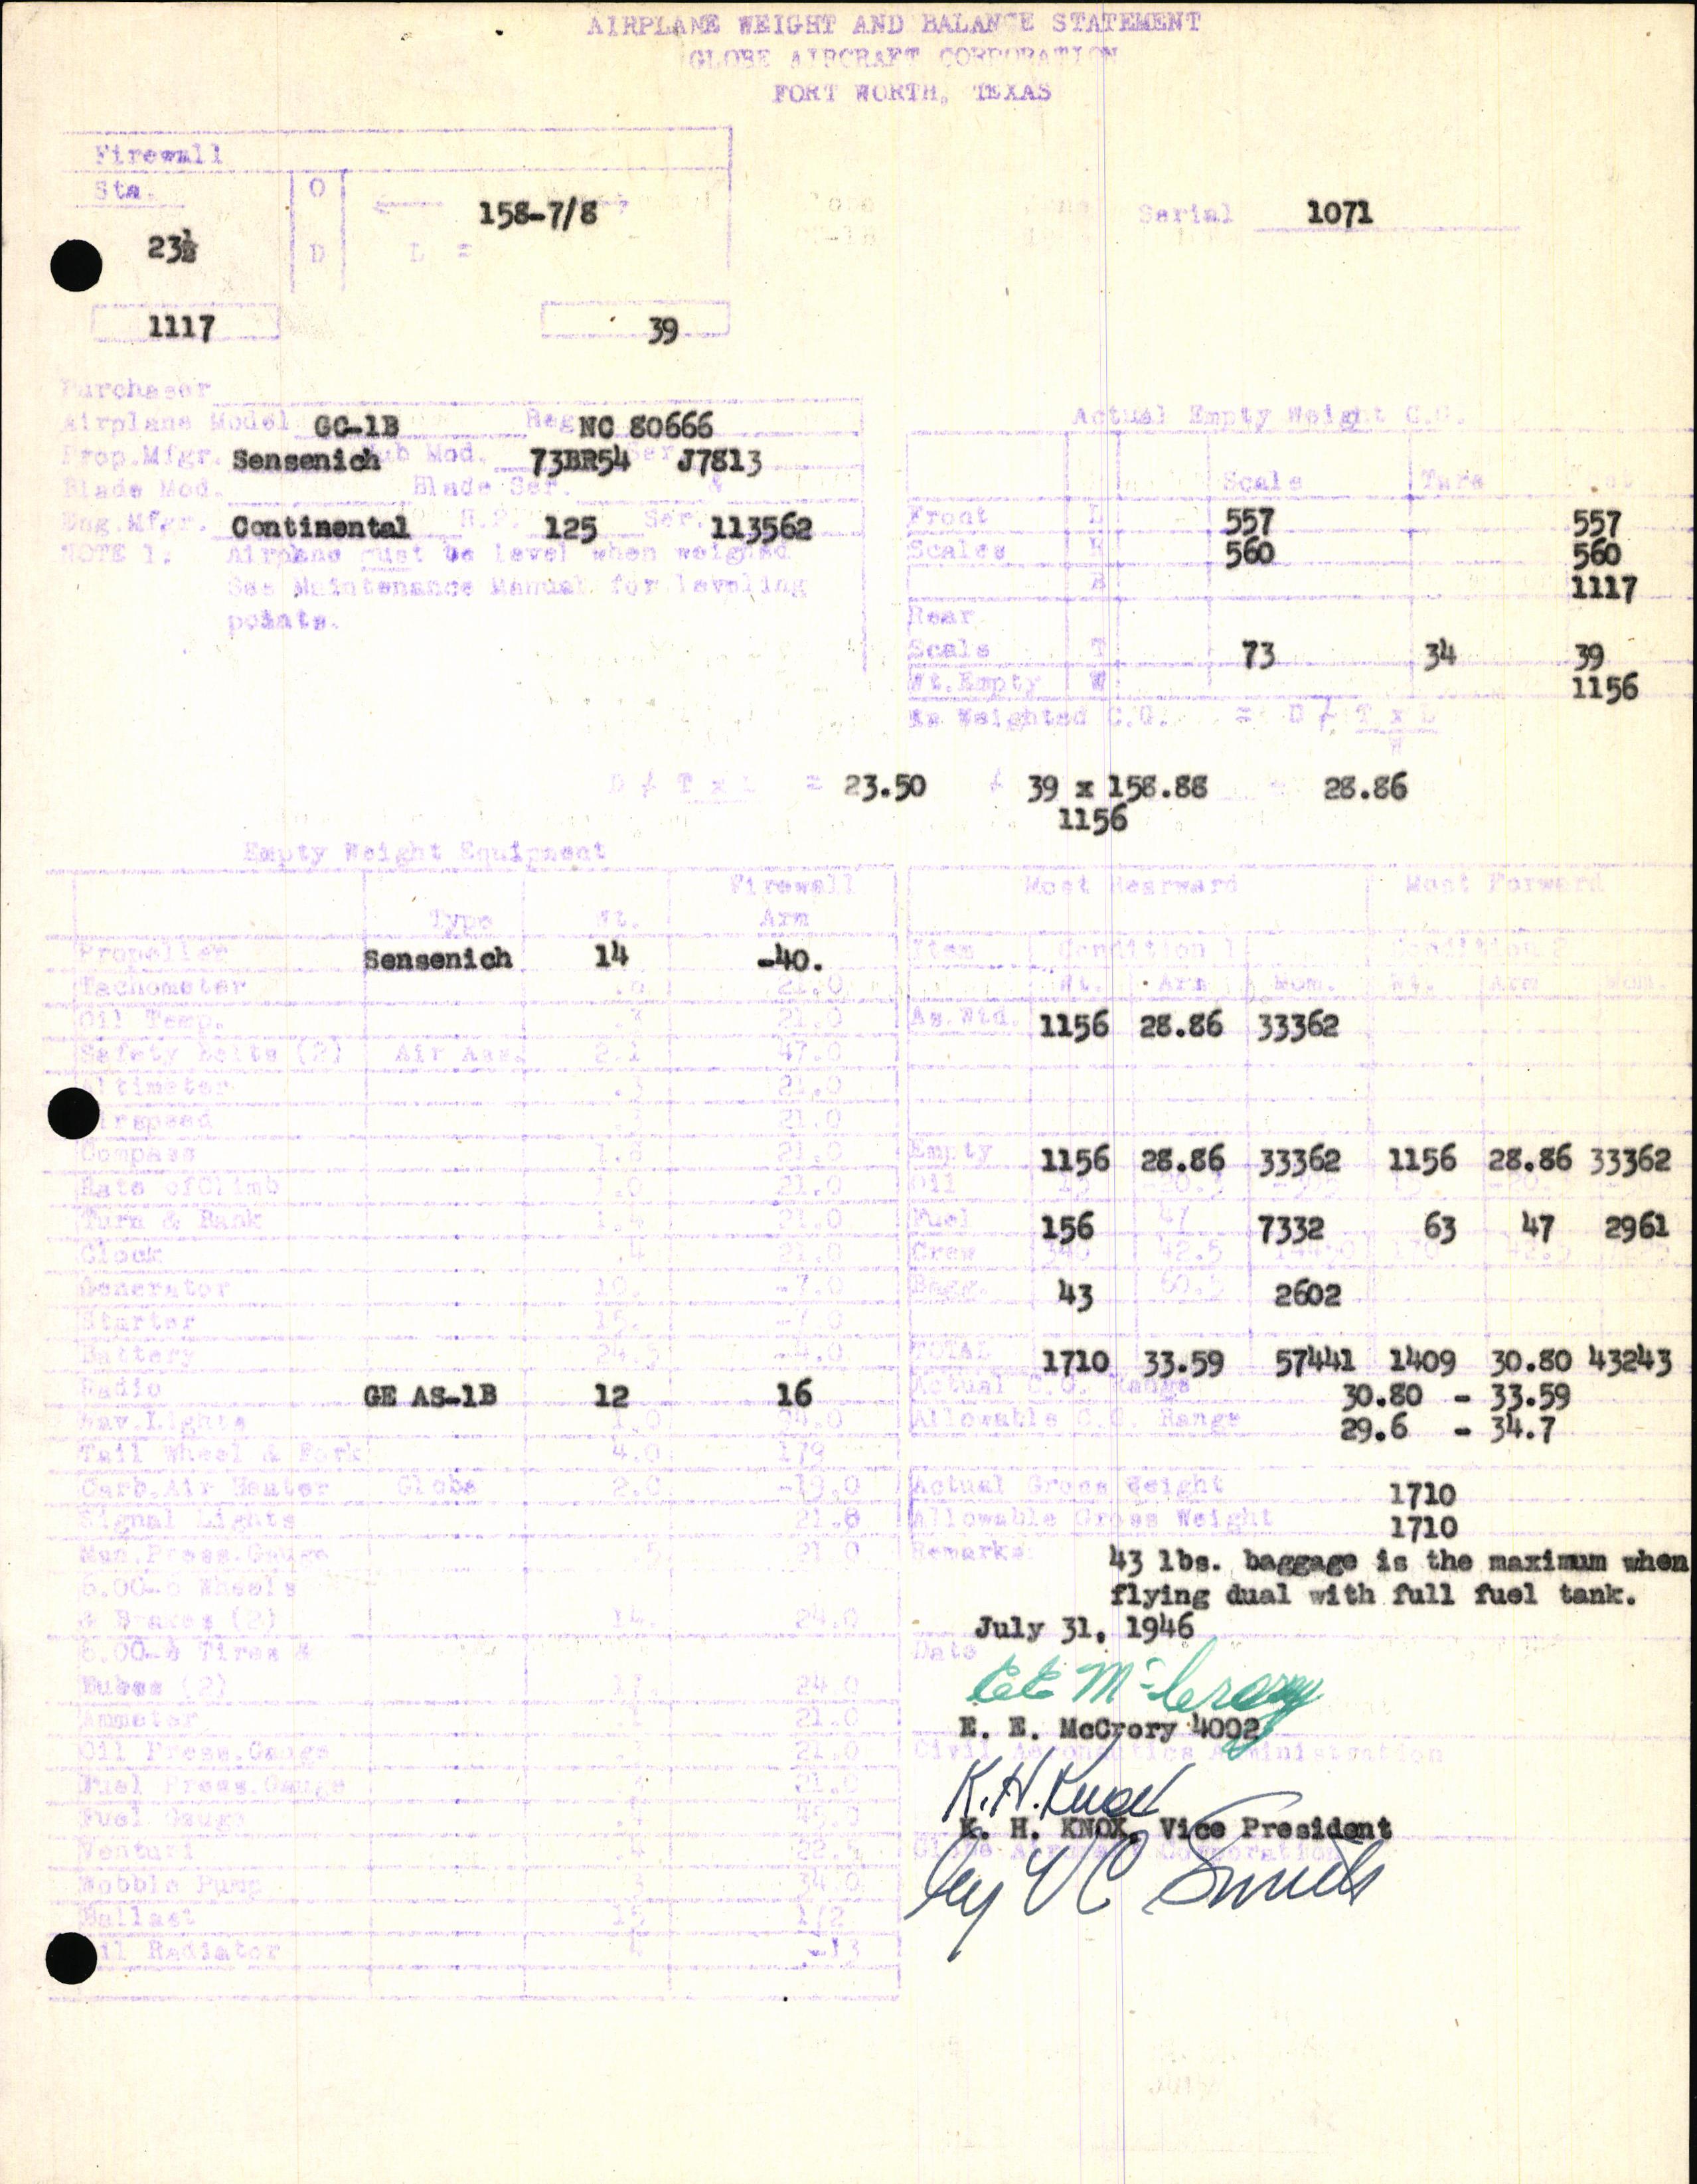 Sample page 5 from AirCorps Library document: Technical Information for Serial Number 1071